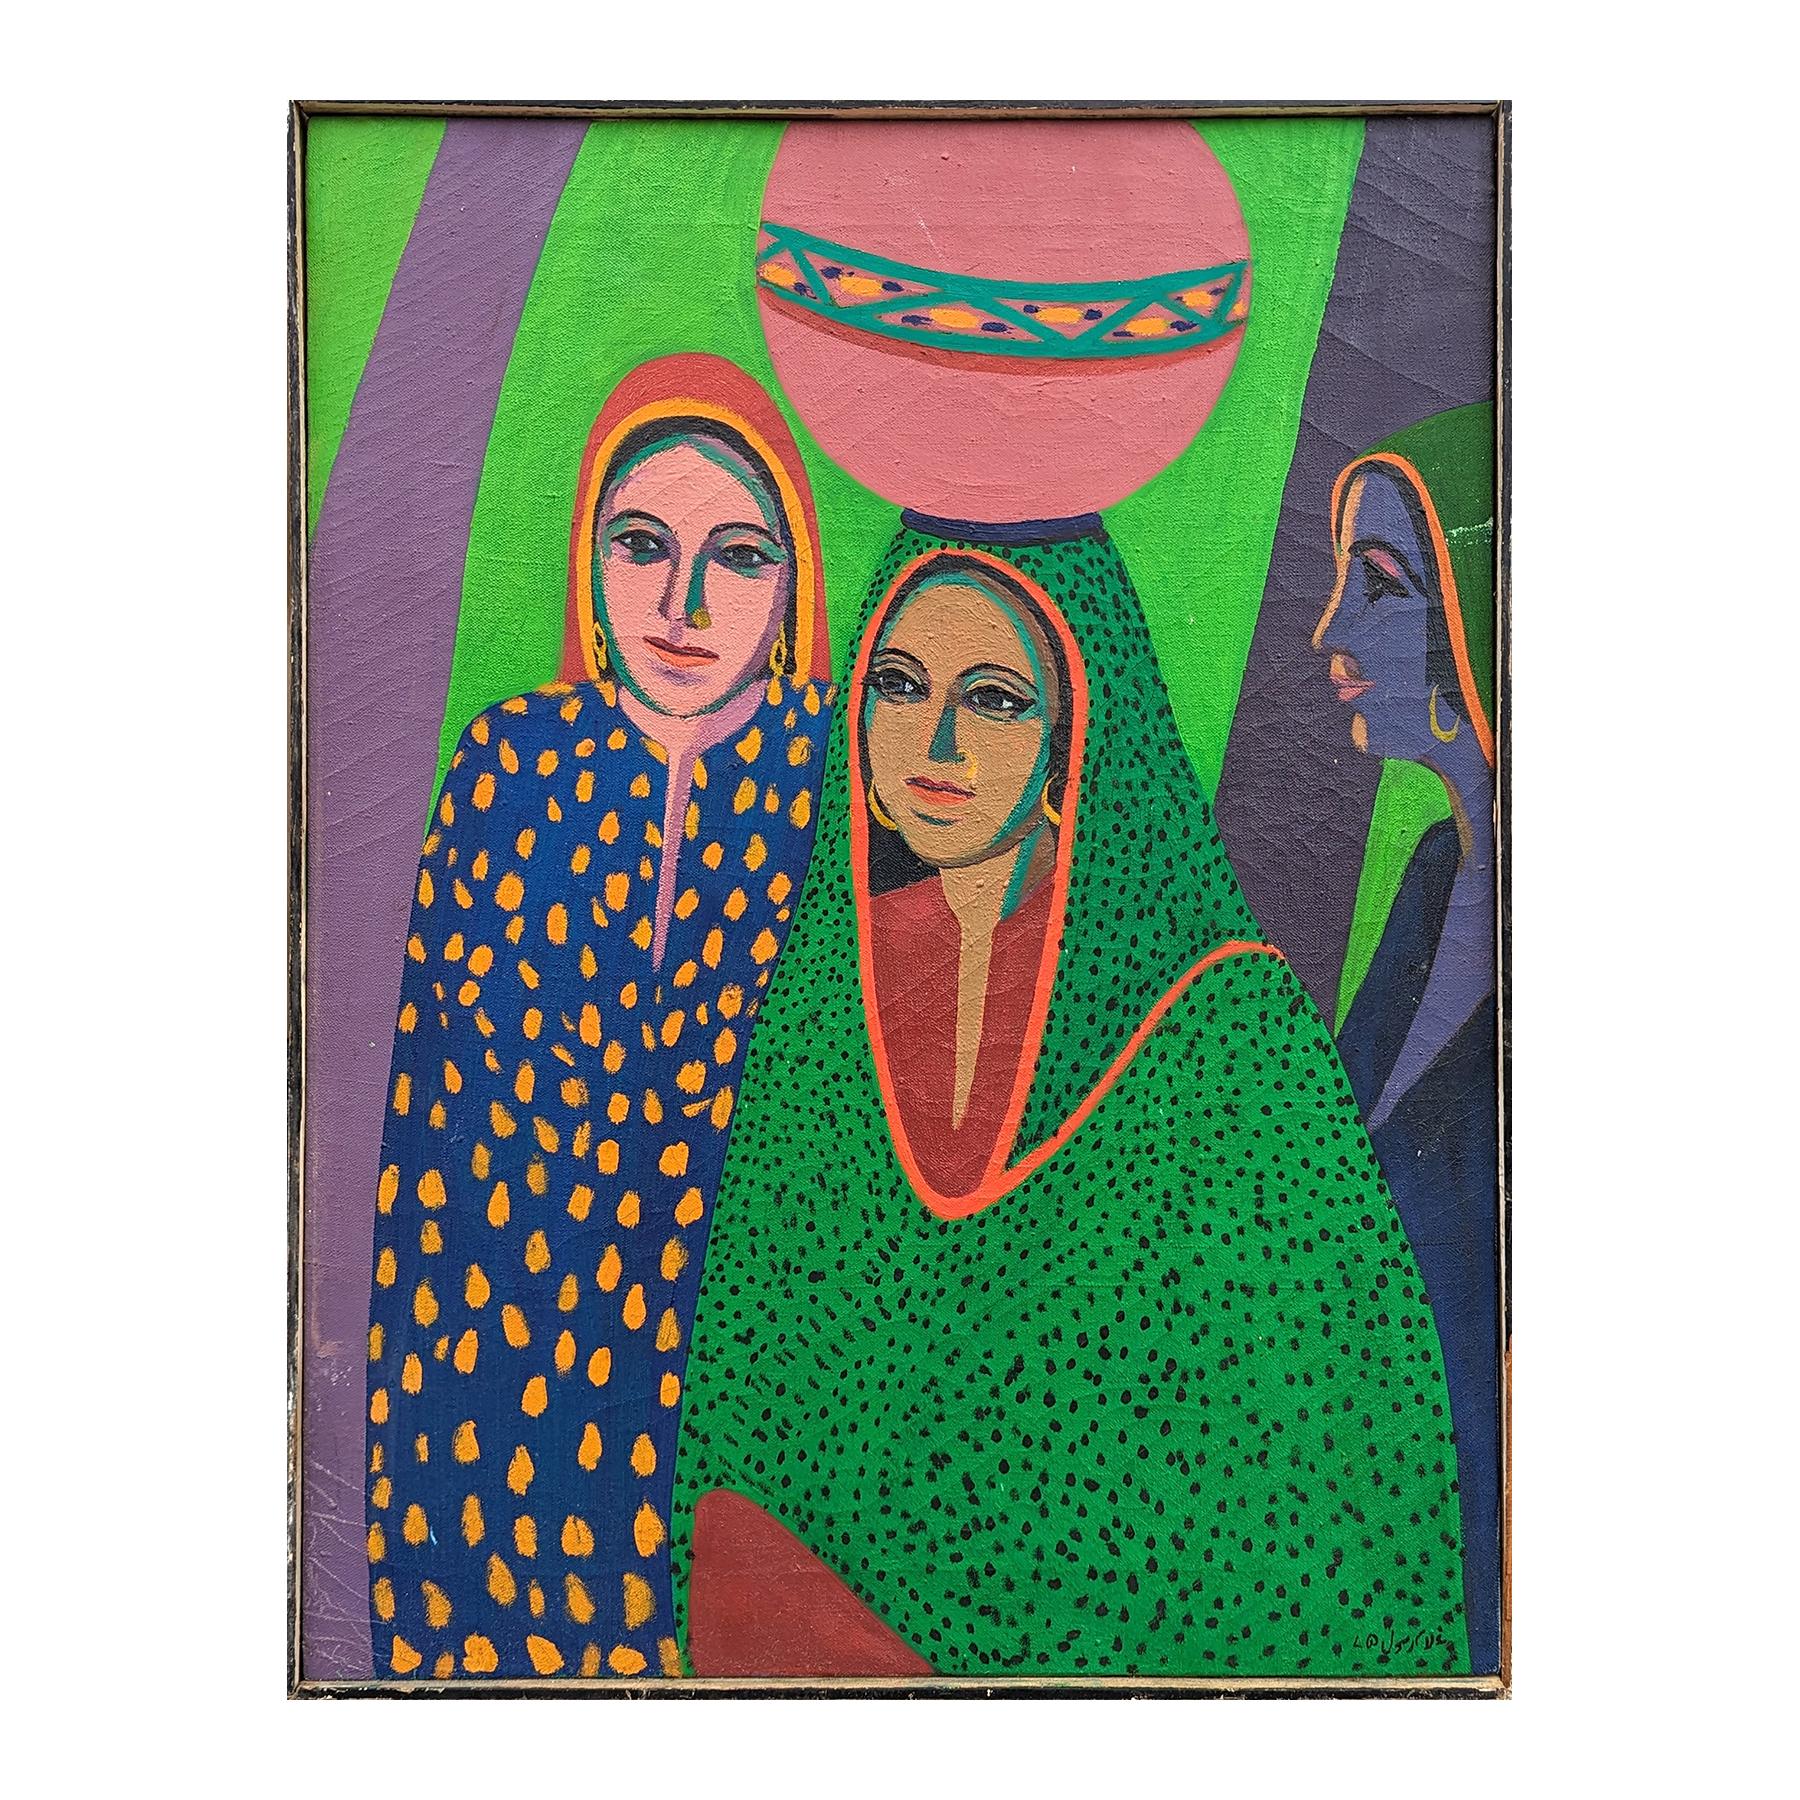 Modern colorful figurative painting by Pakistani artist Ghulam Rasul. The work features three girls in vibrant clothing carrying a water jug set against a geometric green and purple background. Signed and titled on the reverse. Currently hung in a